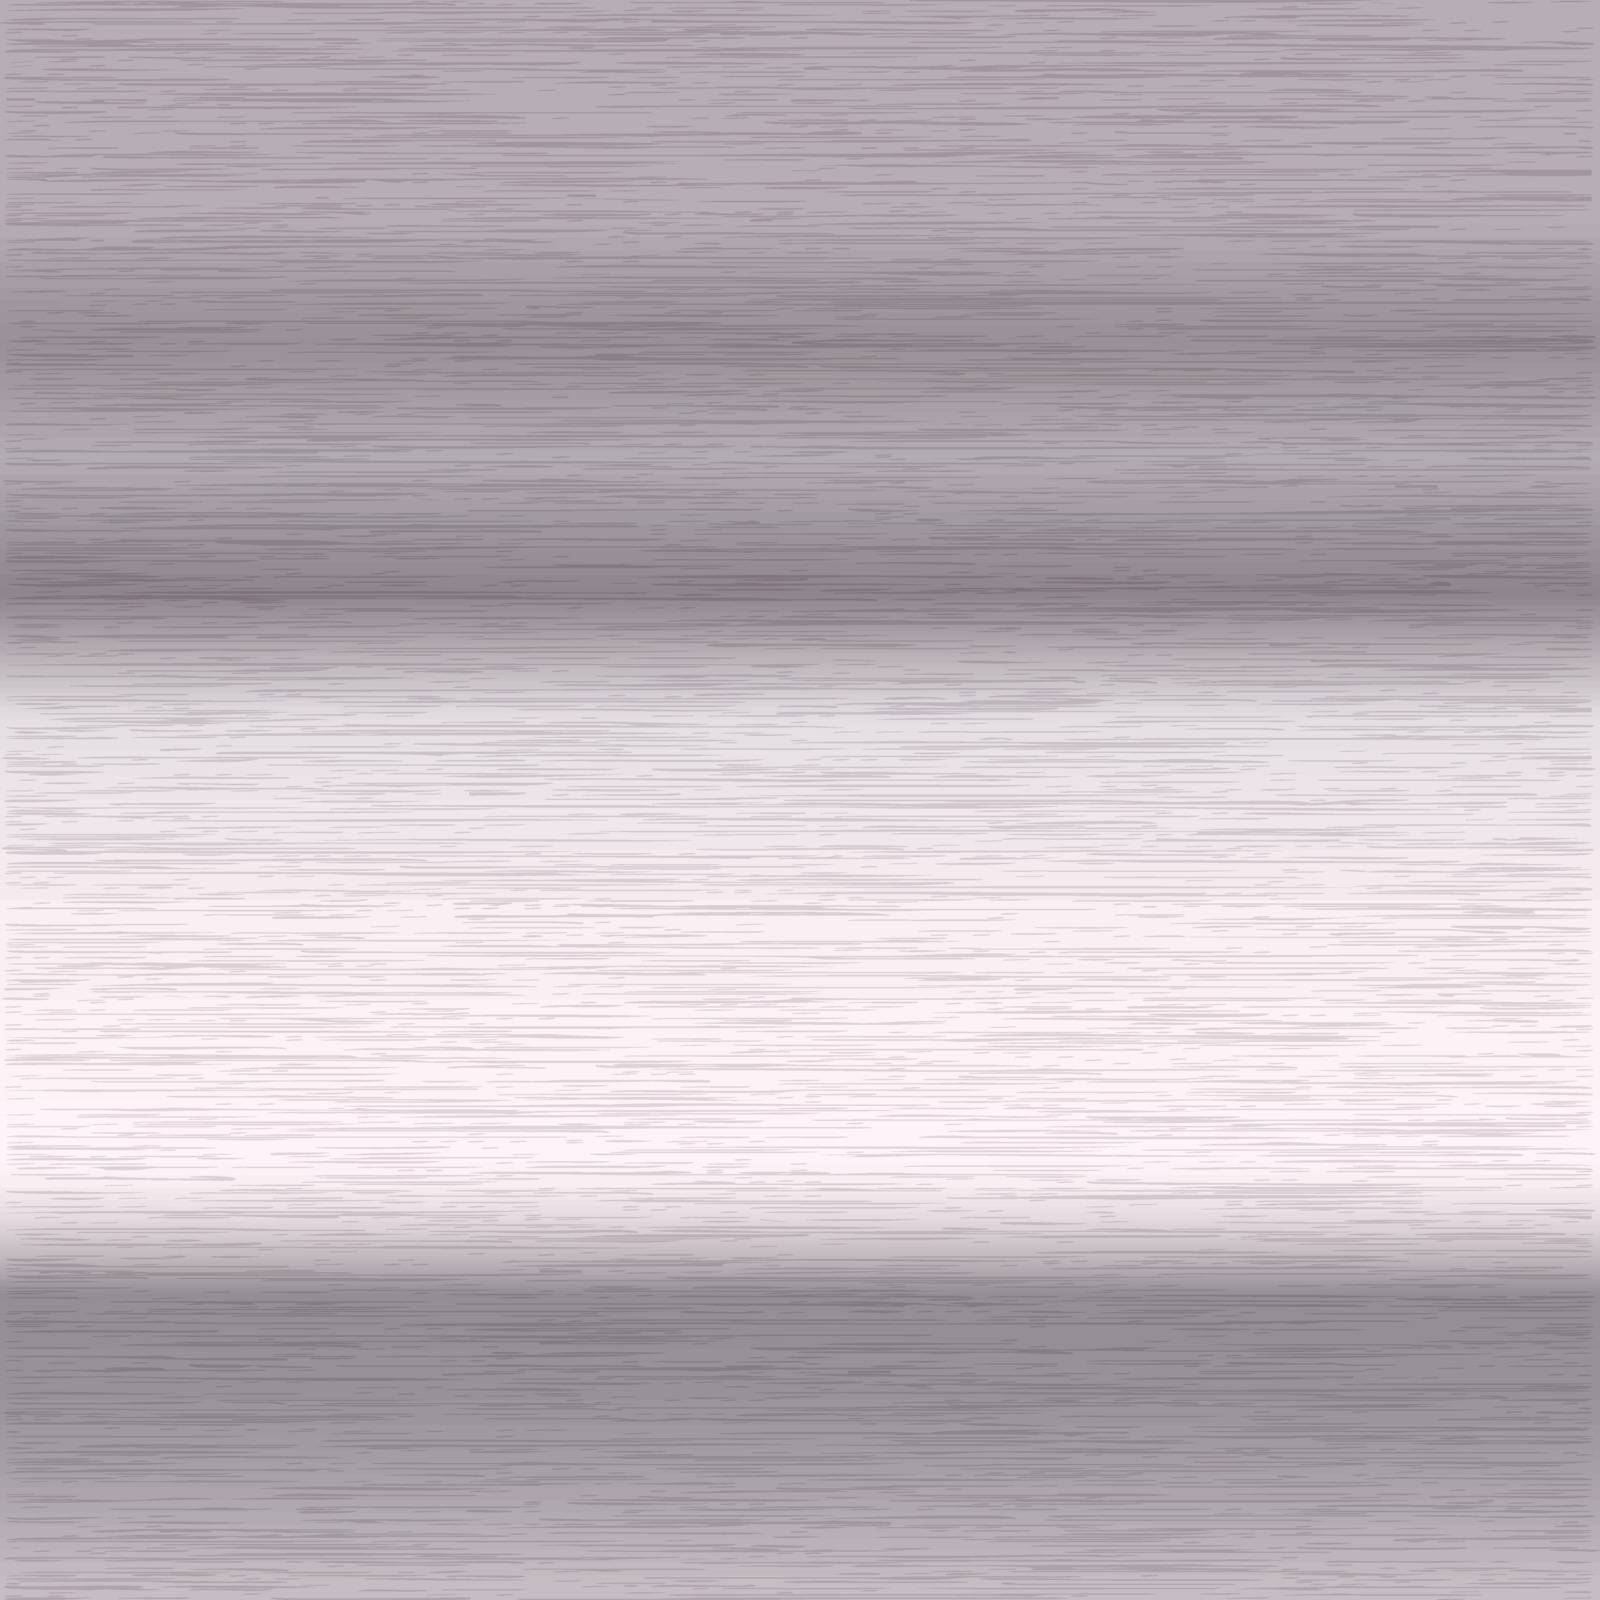 background or texture of brushed platinum surface